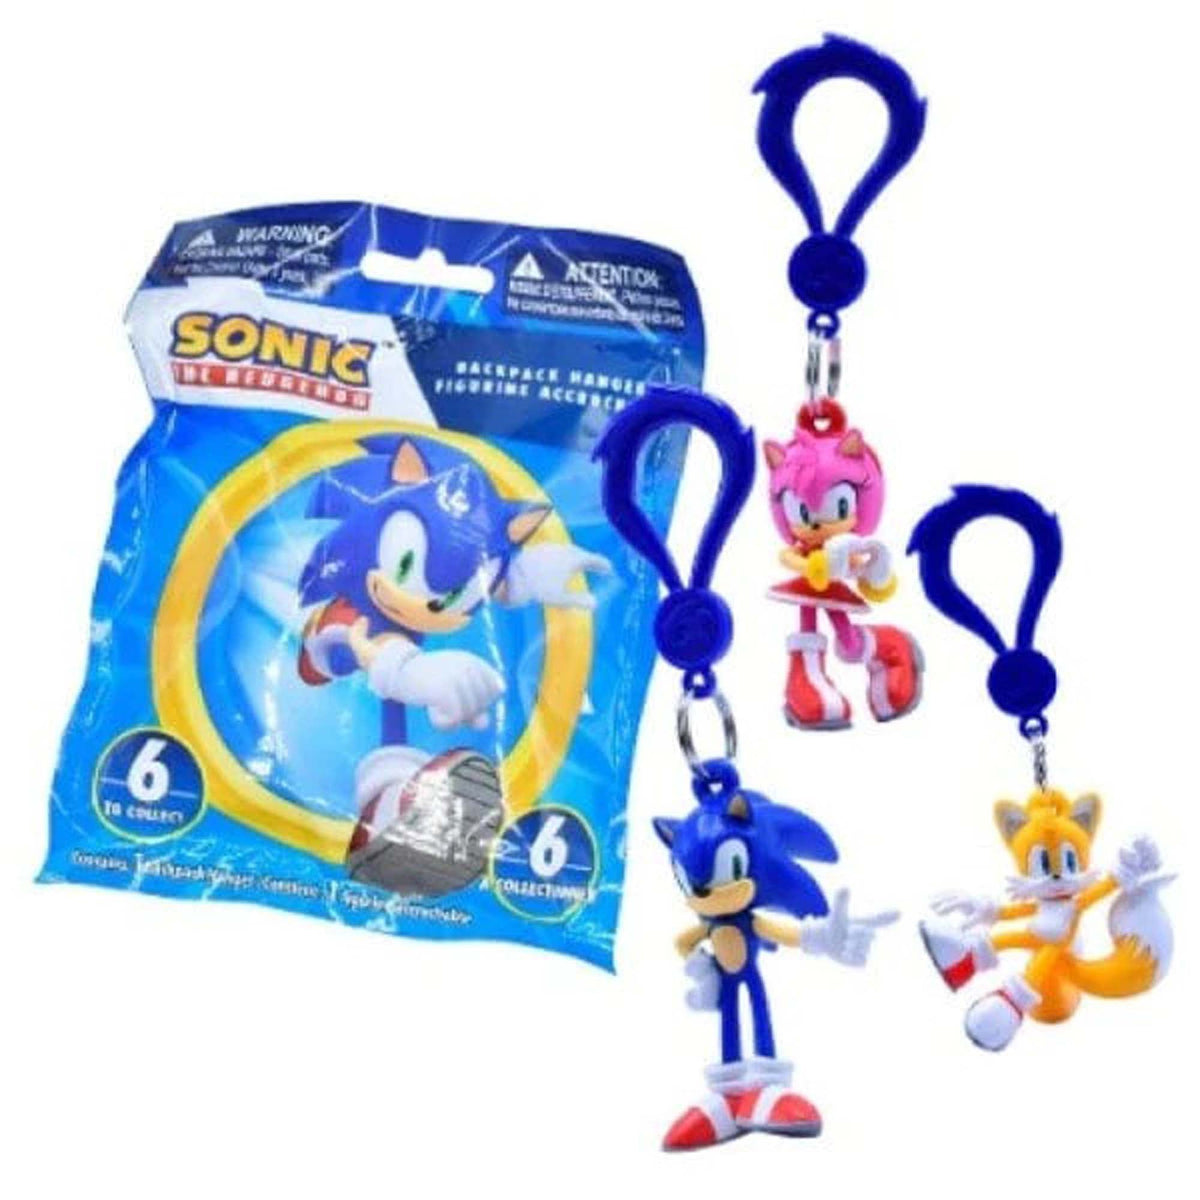 RED PLANET GROUP Plushes Sonic the Hedgehog Backpack Hangers, 3 Inches, Assortment, 1 Count